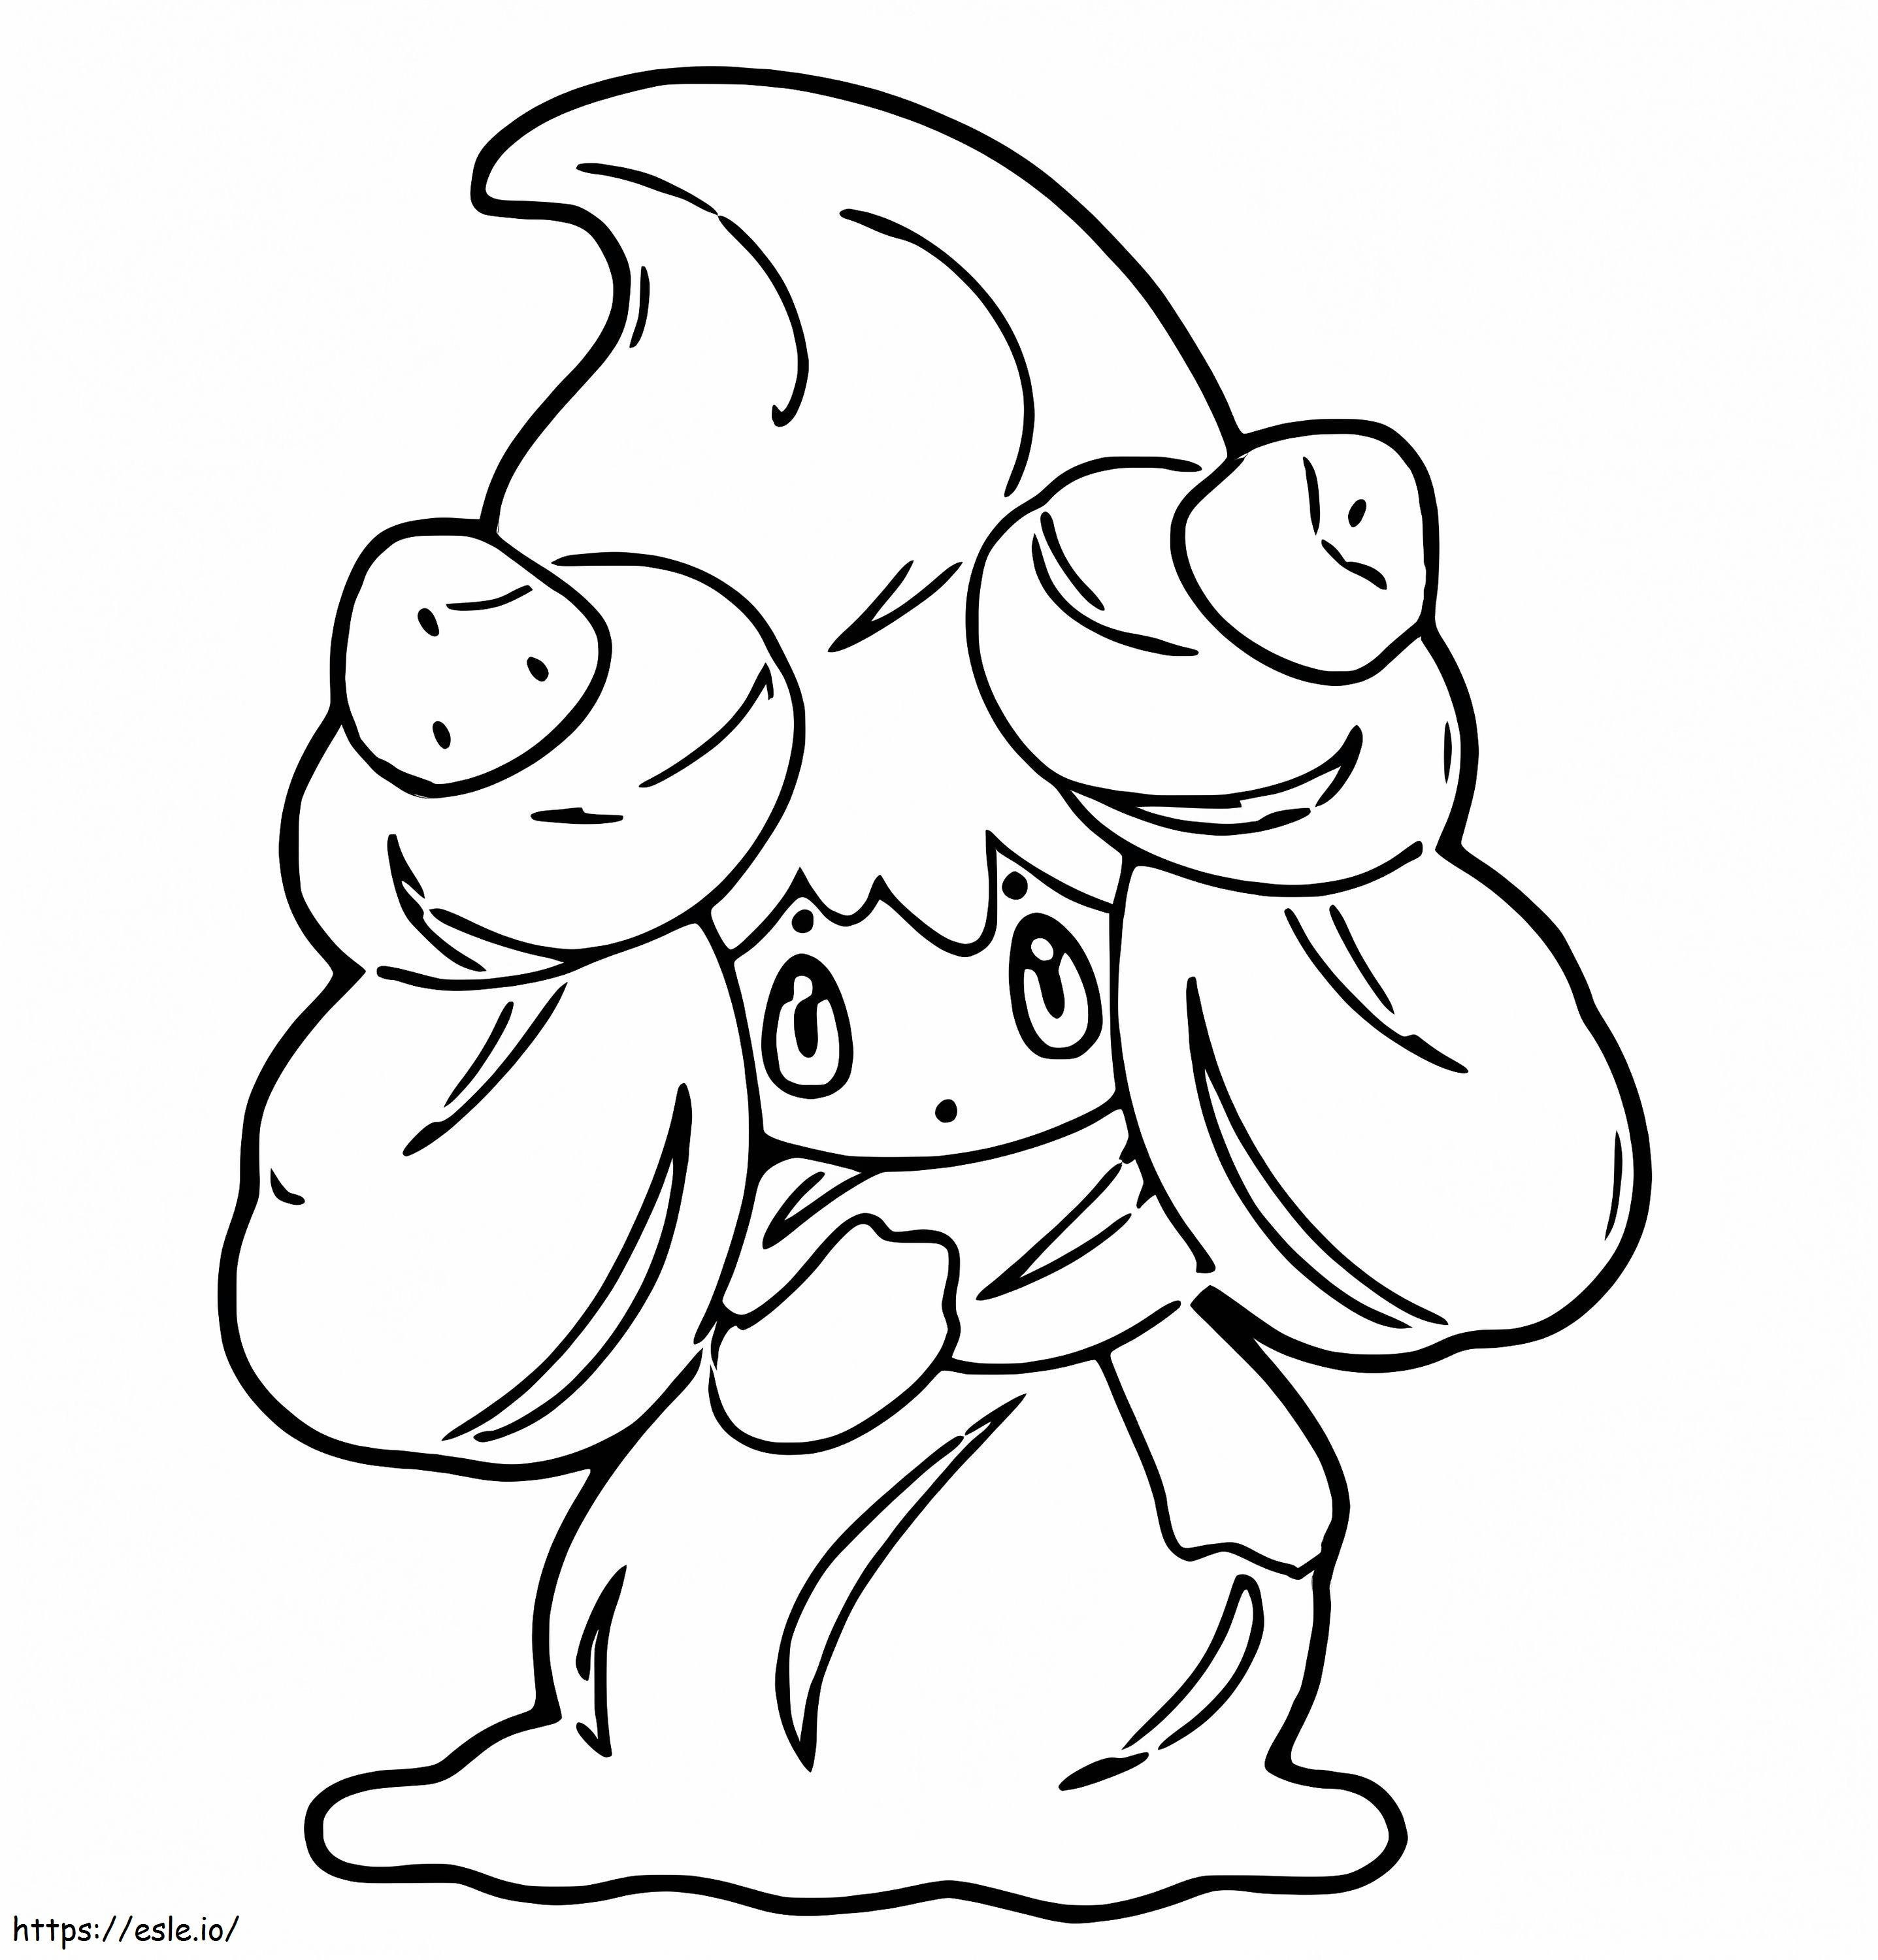 Alcremie Pokemon coloring page